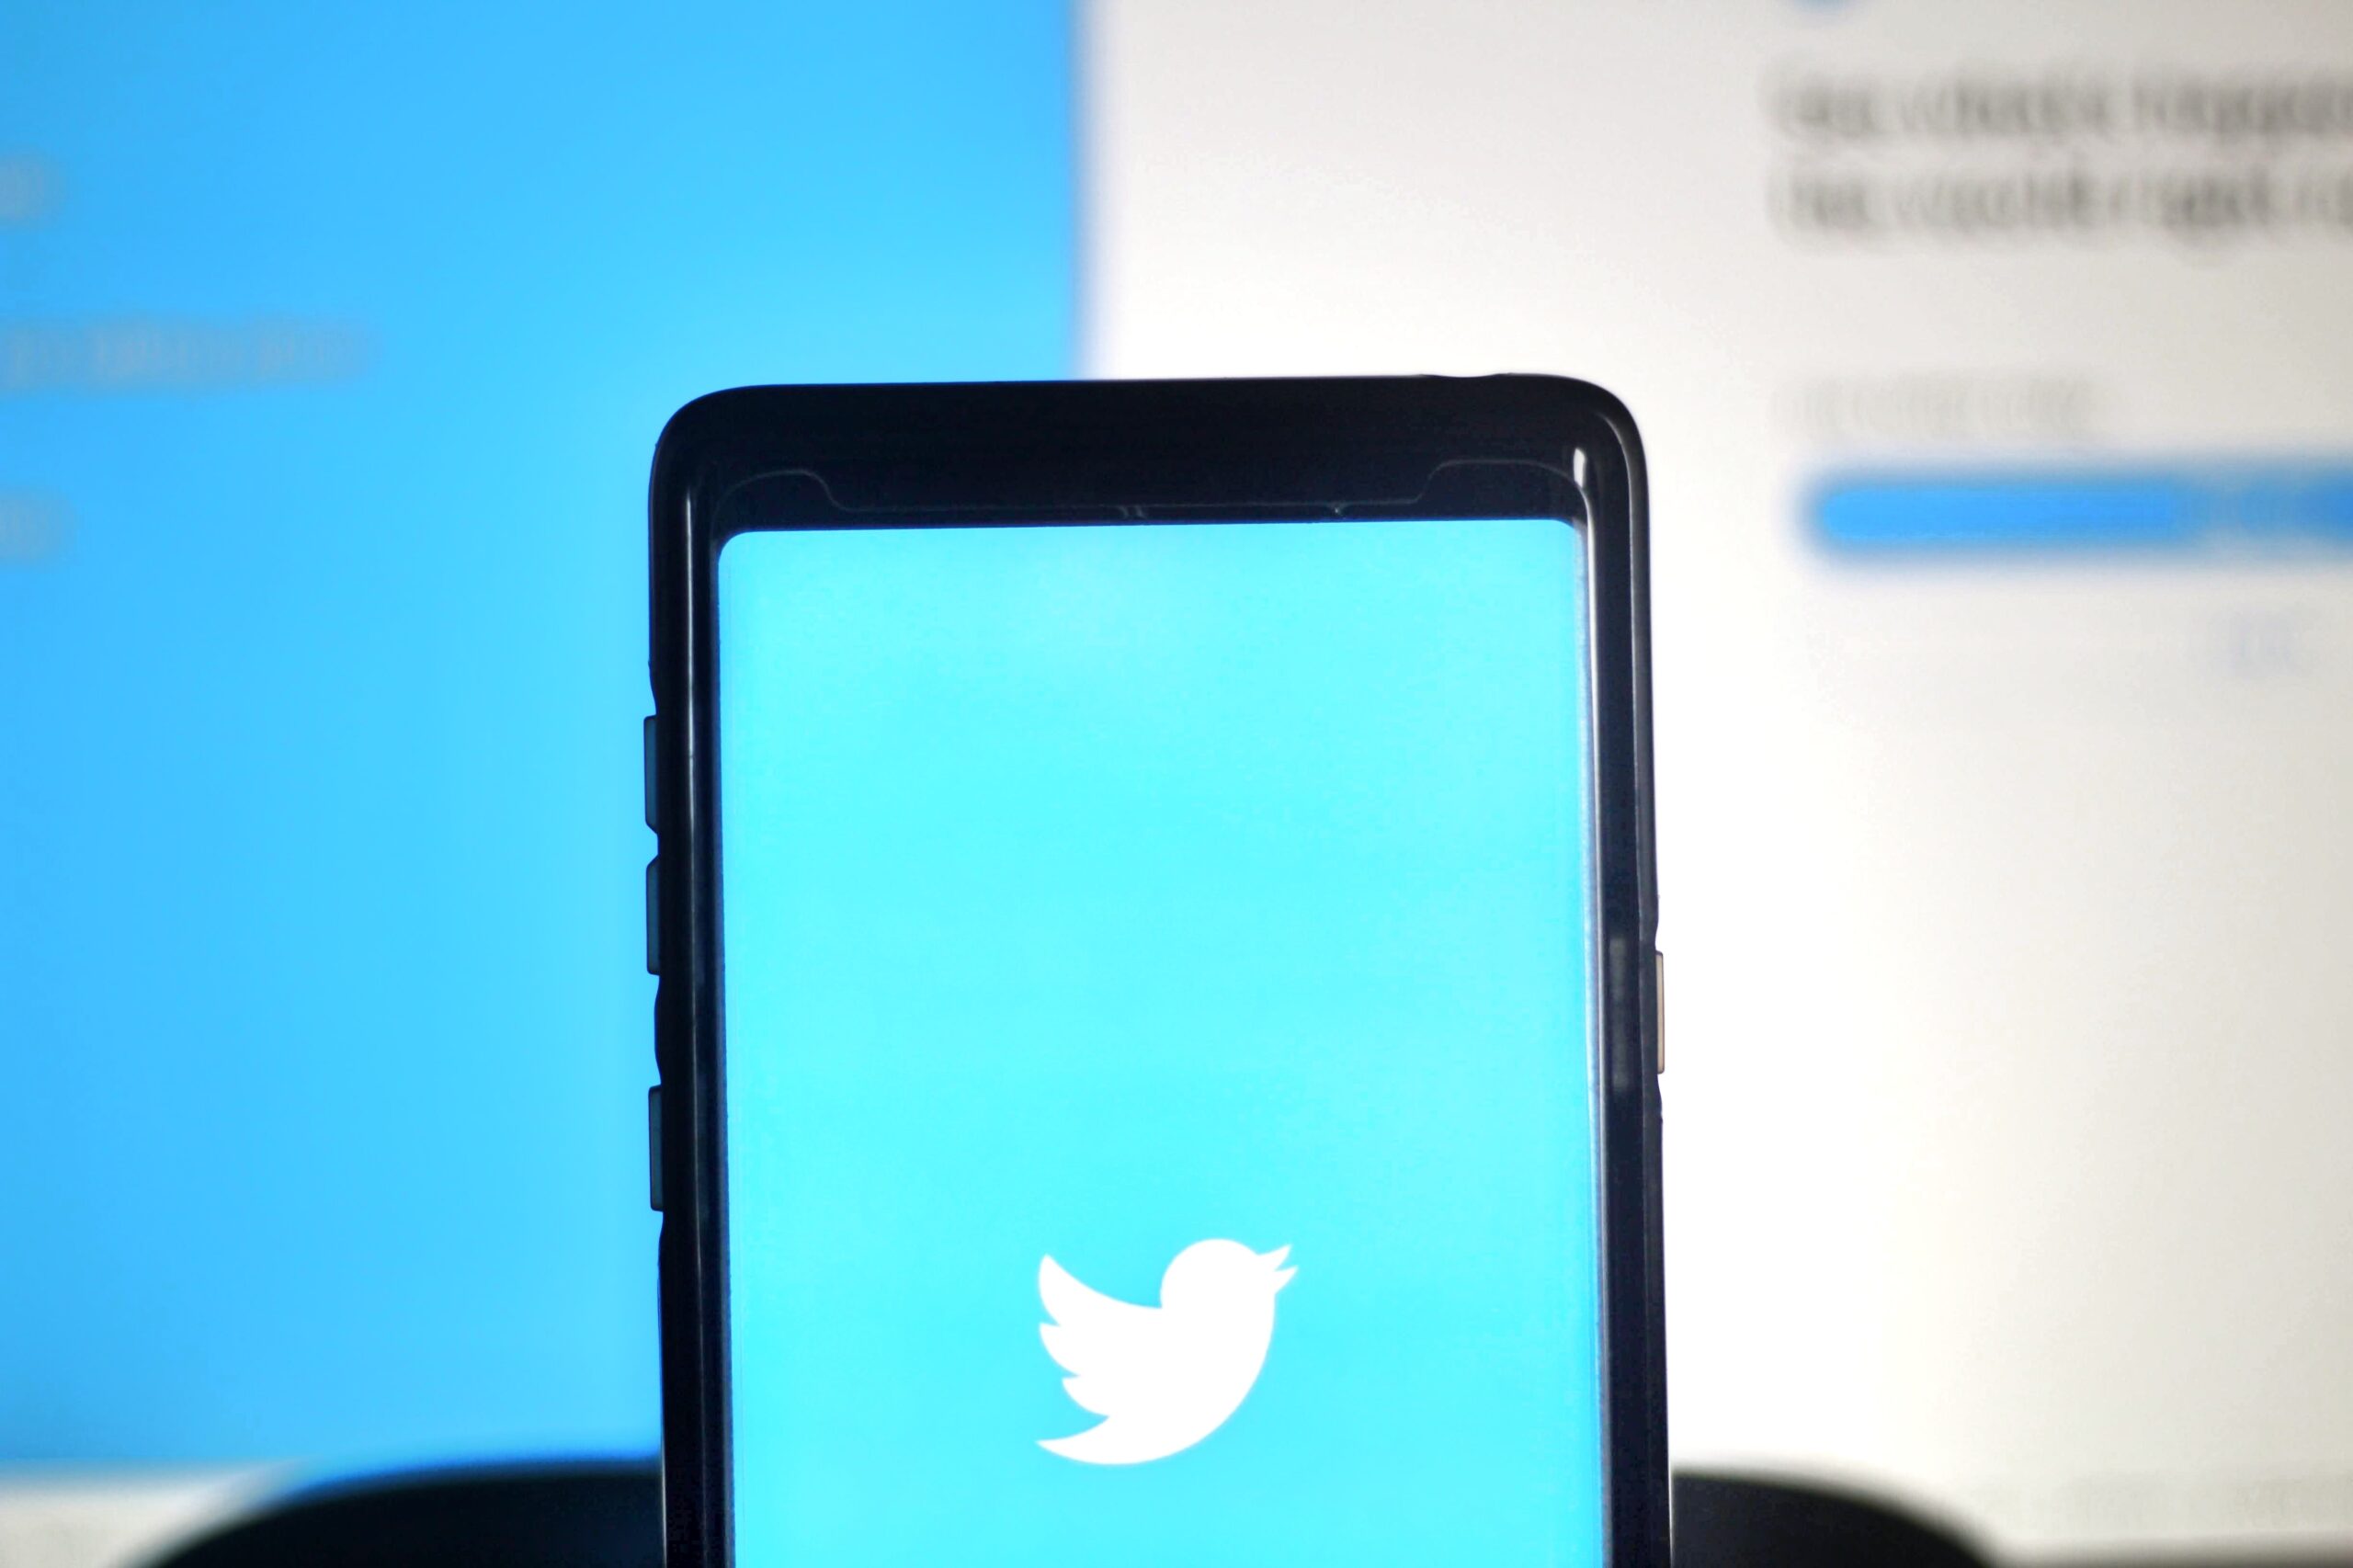 Twitter’s new policy aims to protect private individuals in photos